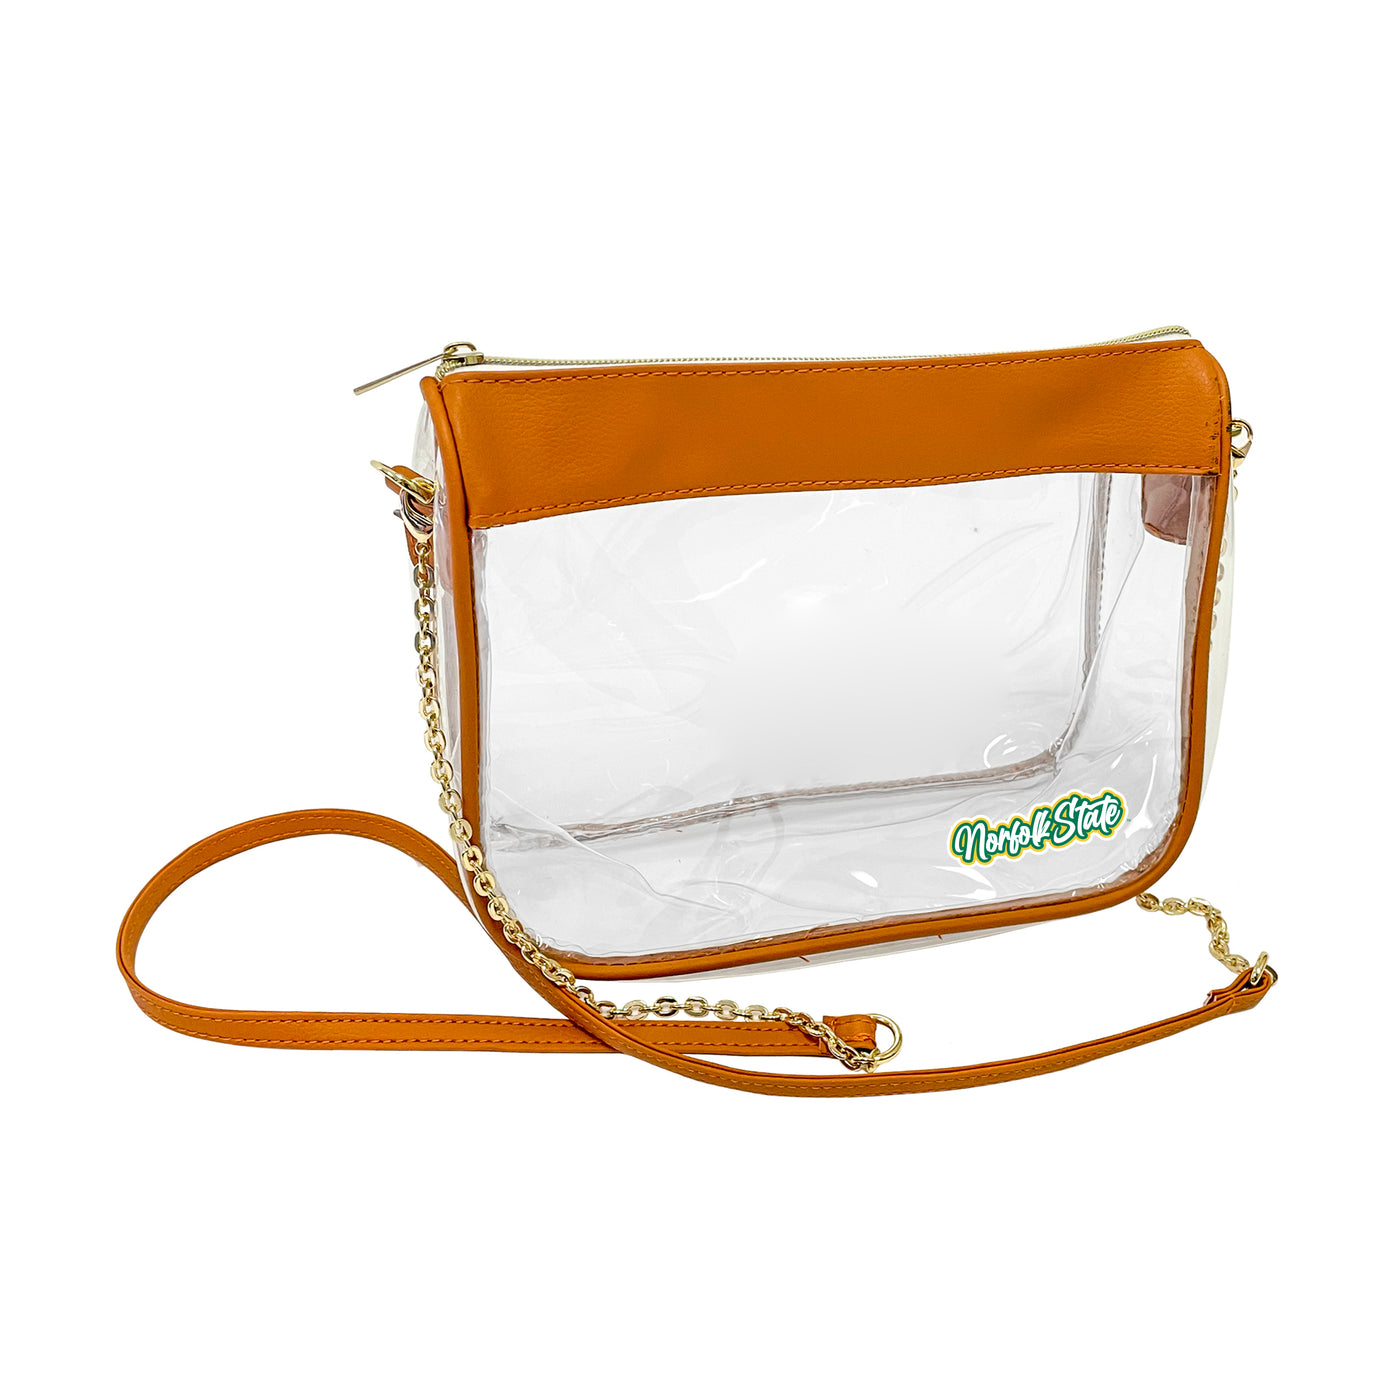 Norfolk State Hype Clear Bag